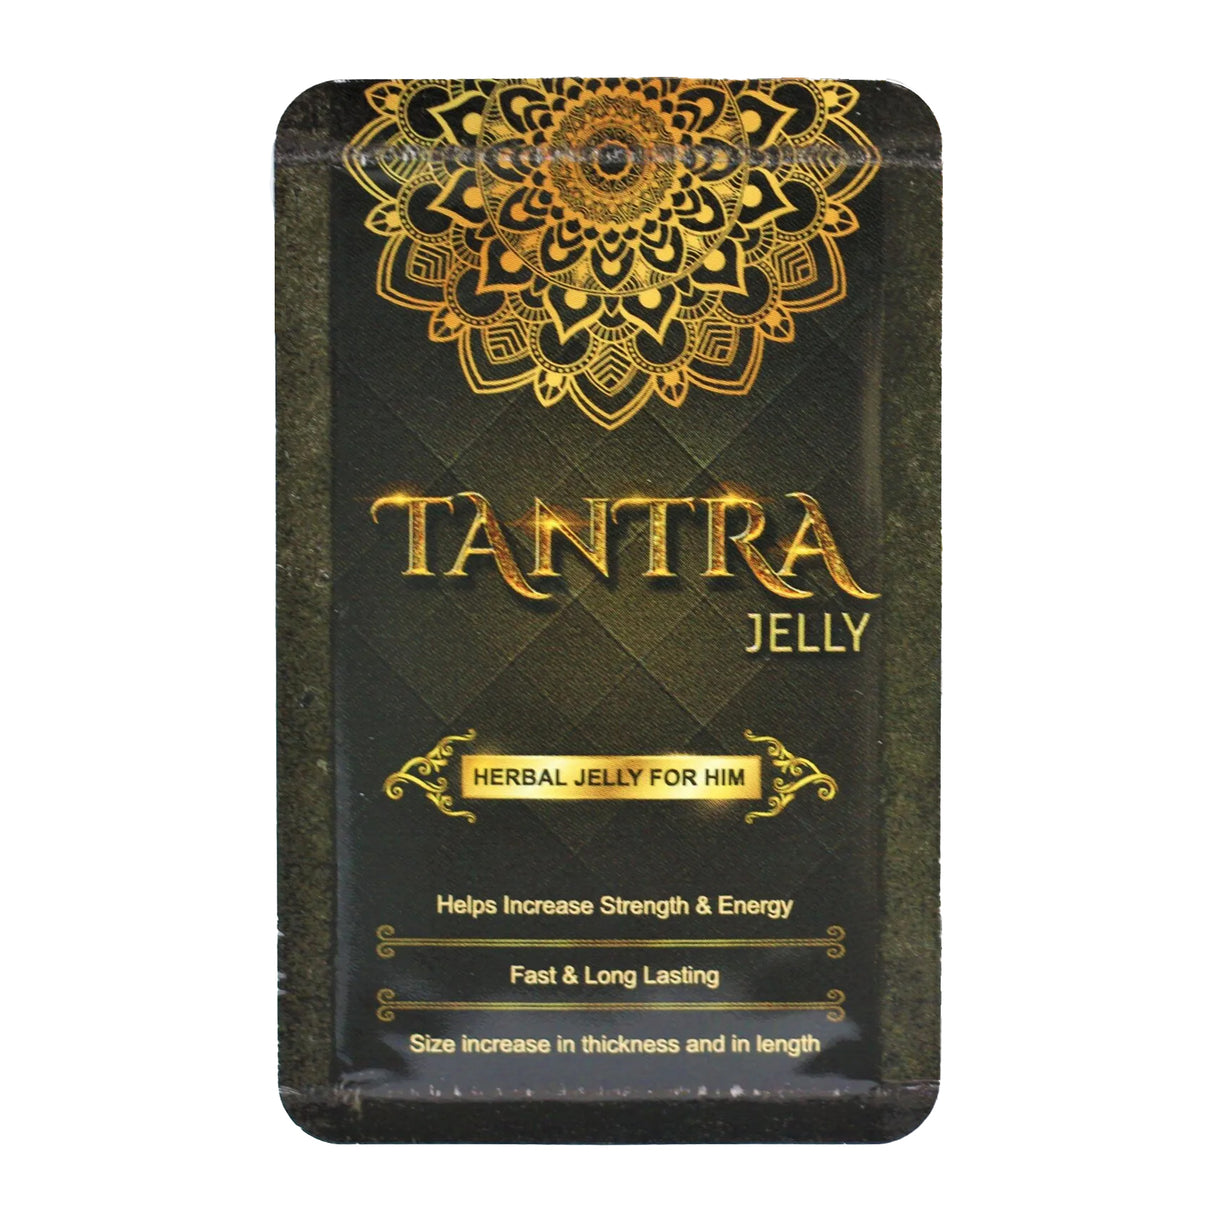 Tantra Herbal Jelly for Him Single Packet